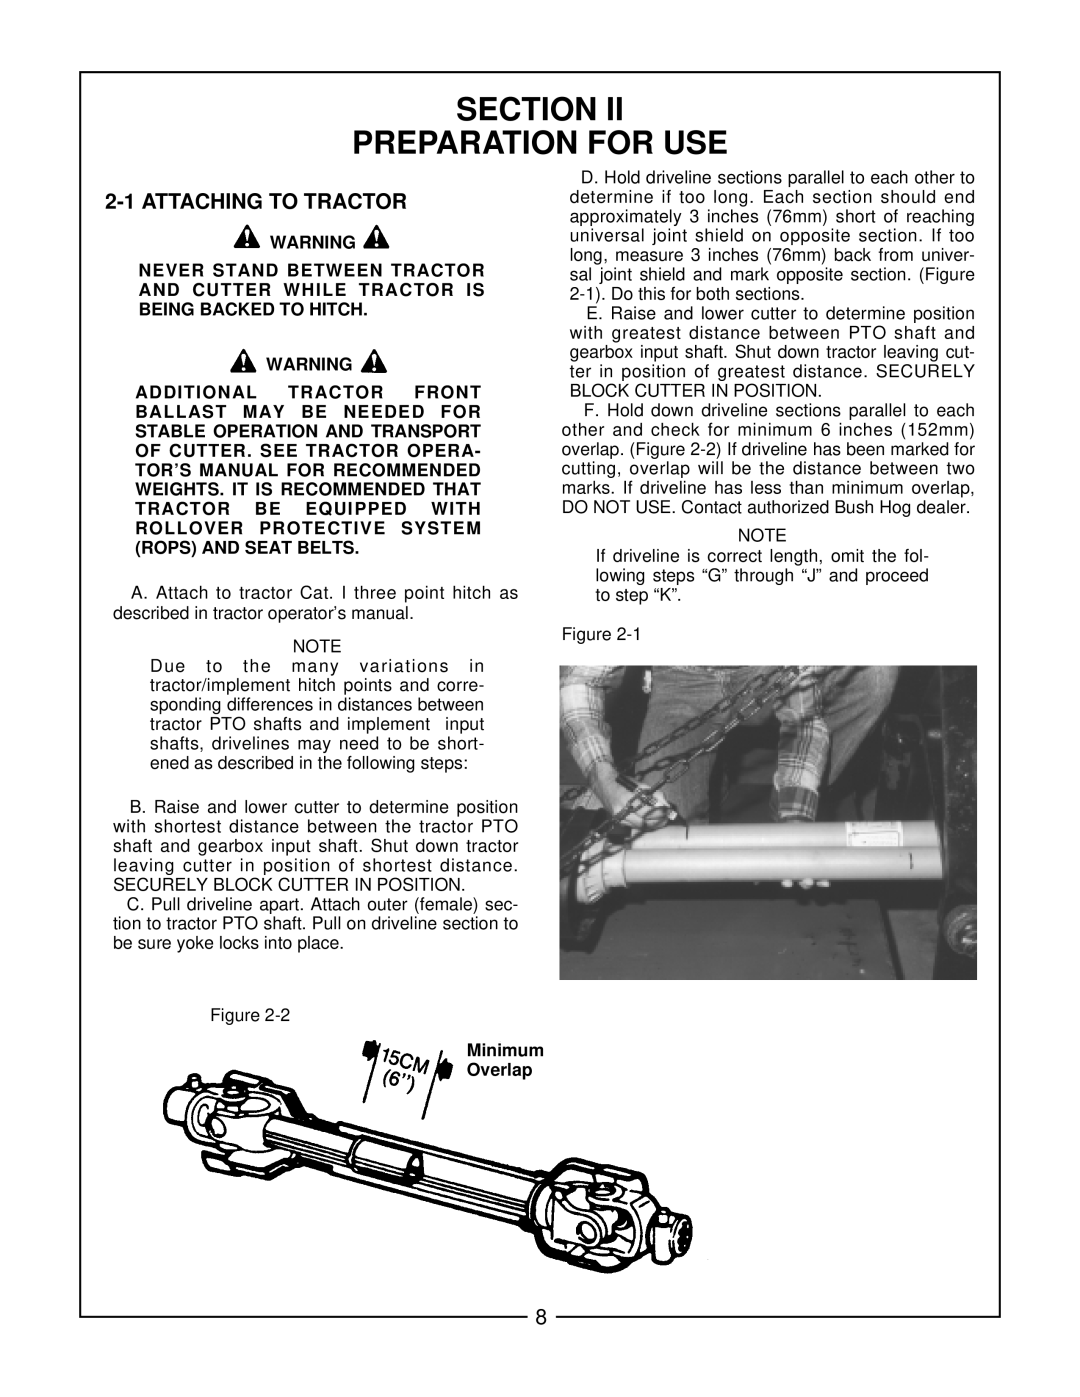 Bush Hog RDTH 84 manual 2-1ATTACHING TO TRACTOR, Section, Preparation For Use, Never Stand Between Tractor, Minimum Overlap 